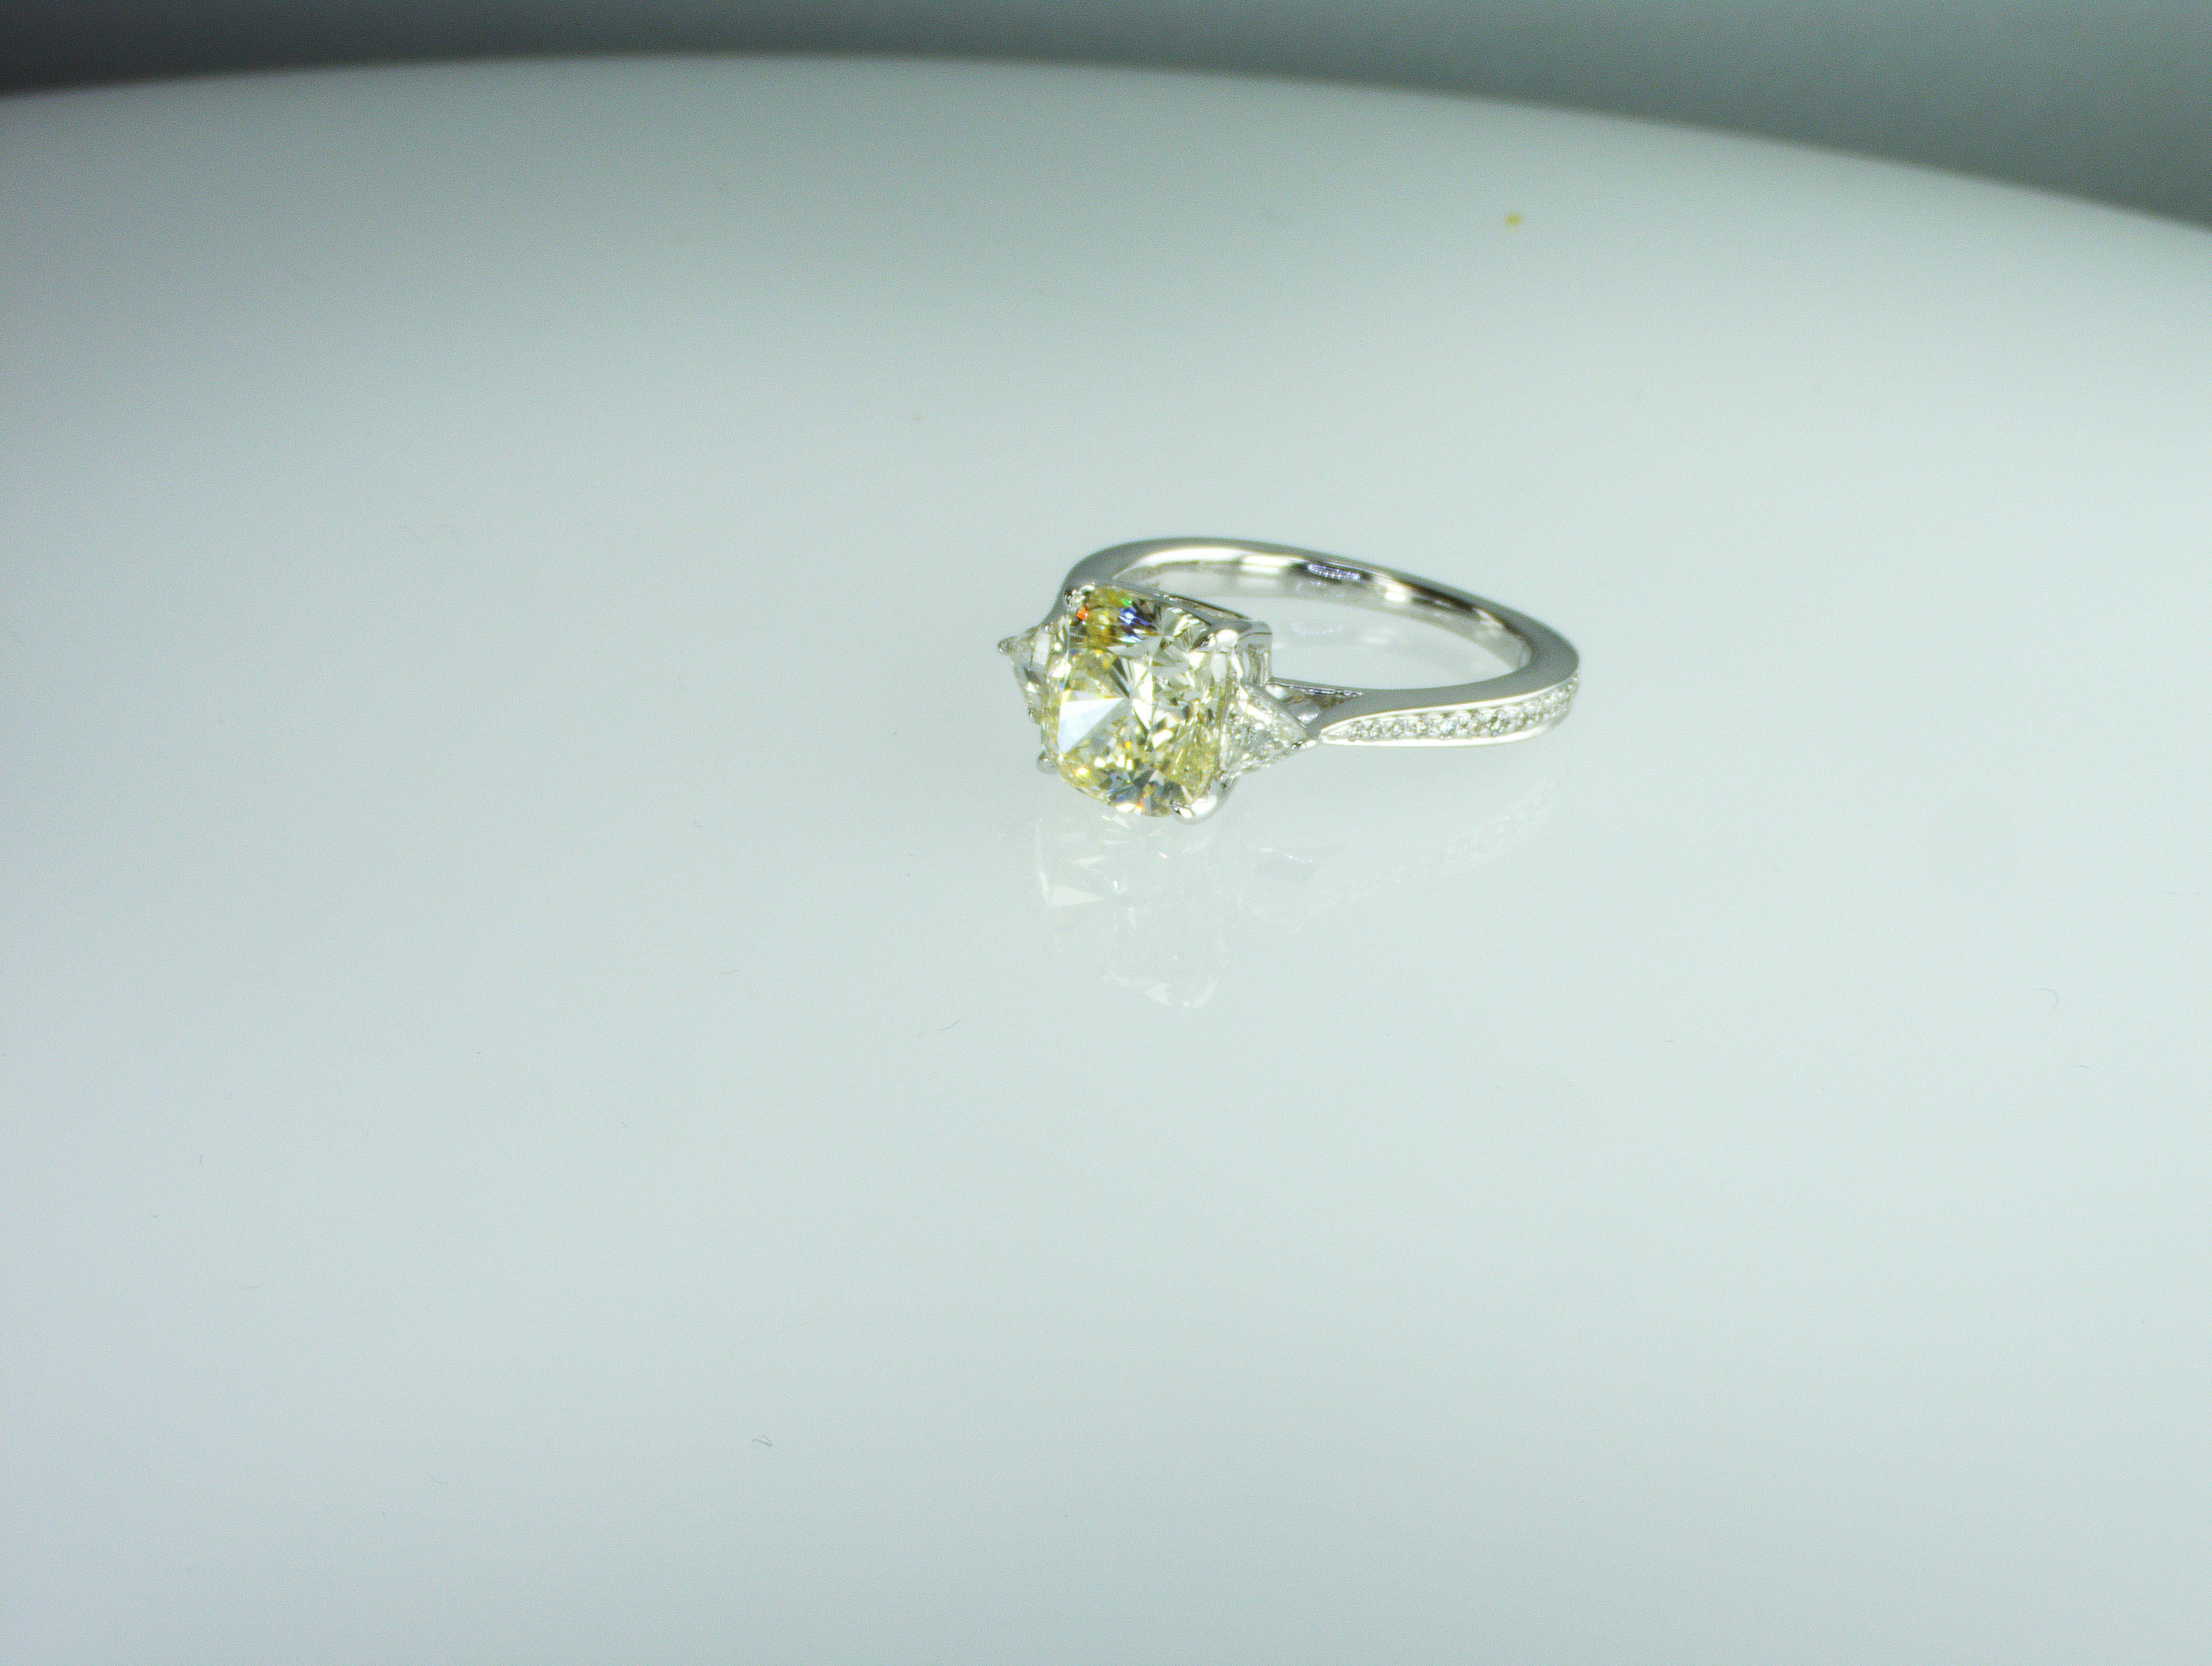 We are natural diamond production company located in Dubai. 
Absolutely gorgeously looking 3 carat Natural Diamond earring.
Description:
Diamond 3 carat:
Shape-Cushion
Colour grade - TW (L) -TC
Clarity -SI
2 diamonds 0.29 carat:
Shape-